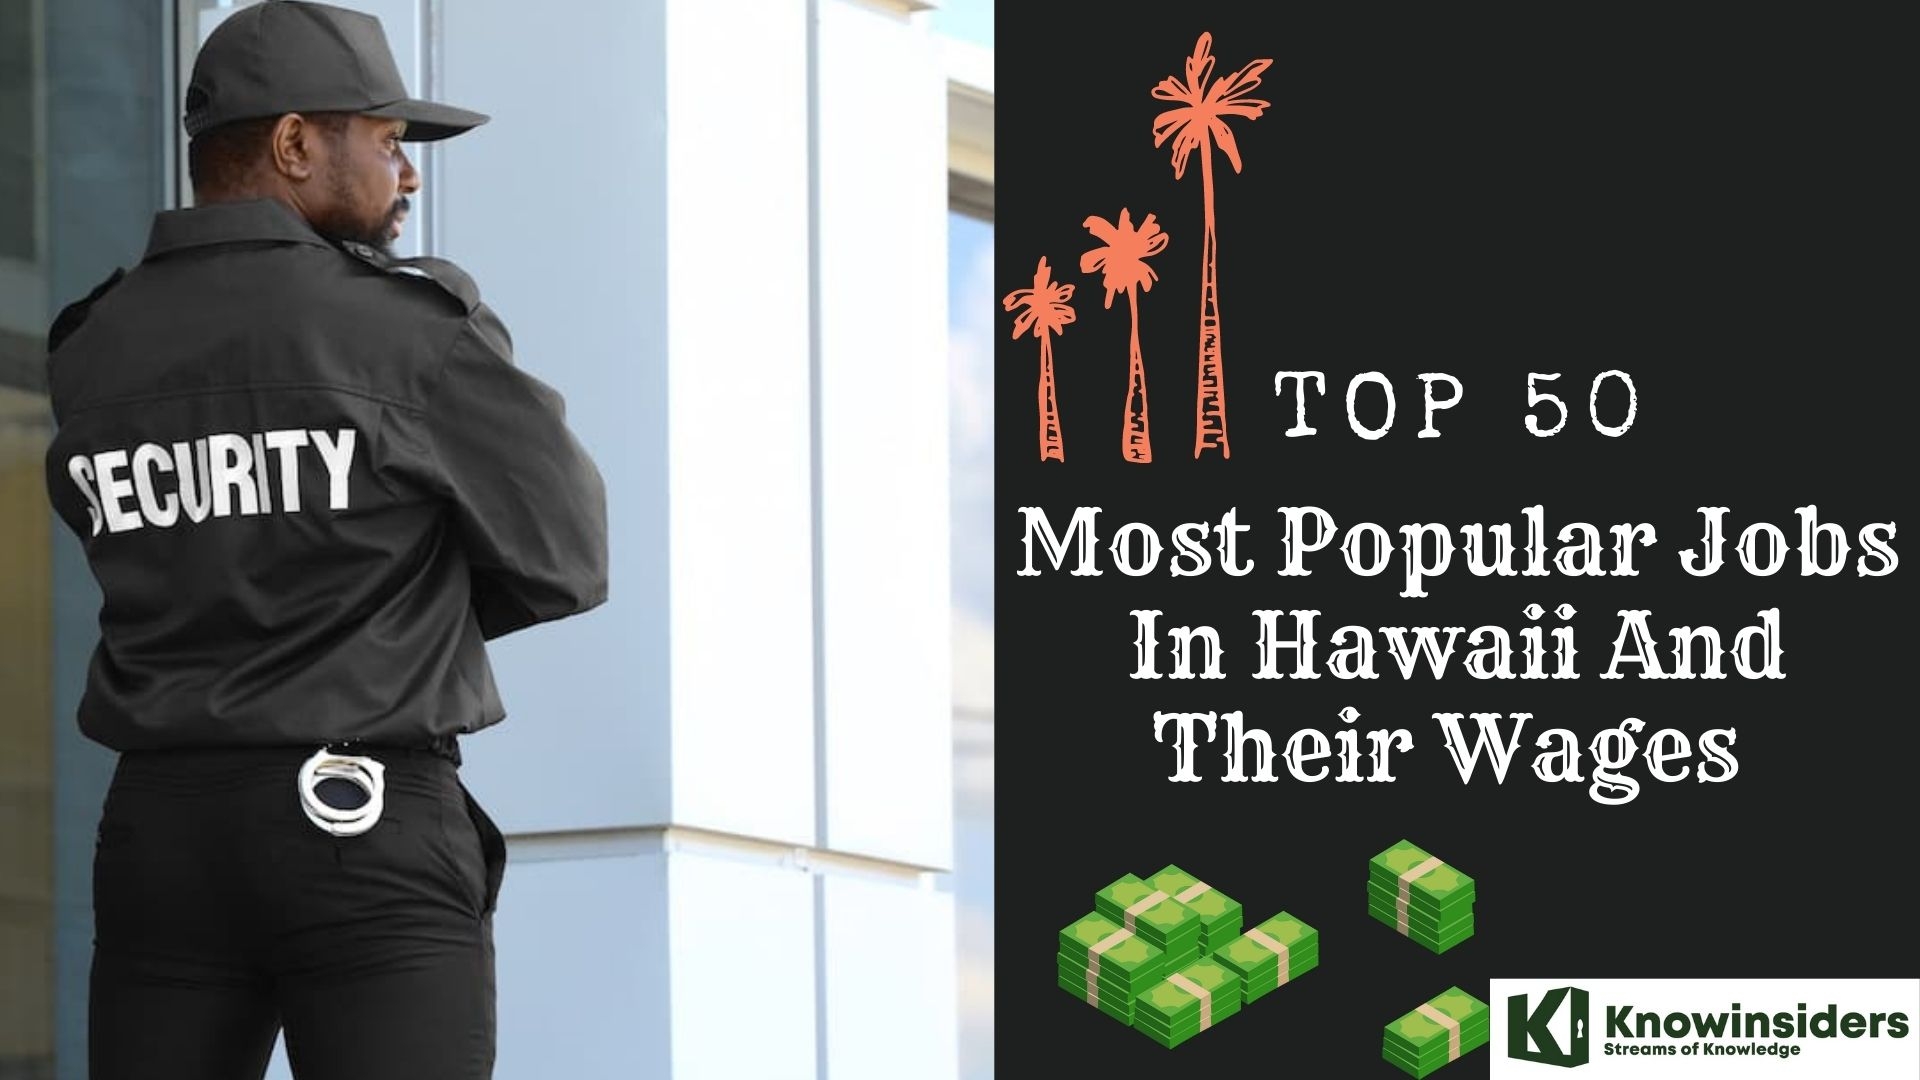 How to Get a Job in Hawaii - Top 50 Most Popular Jobs and Their Wages